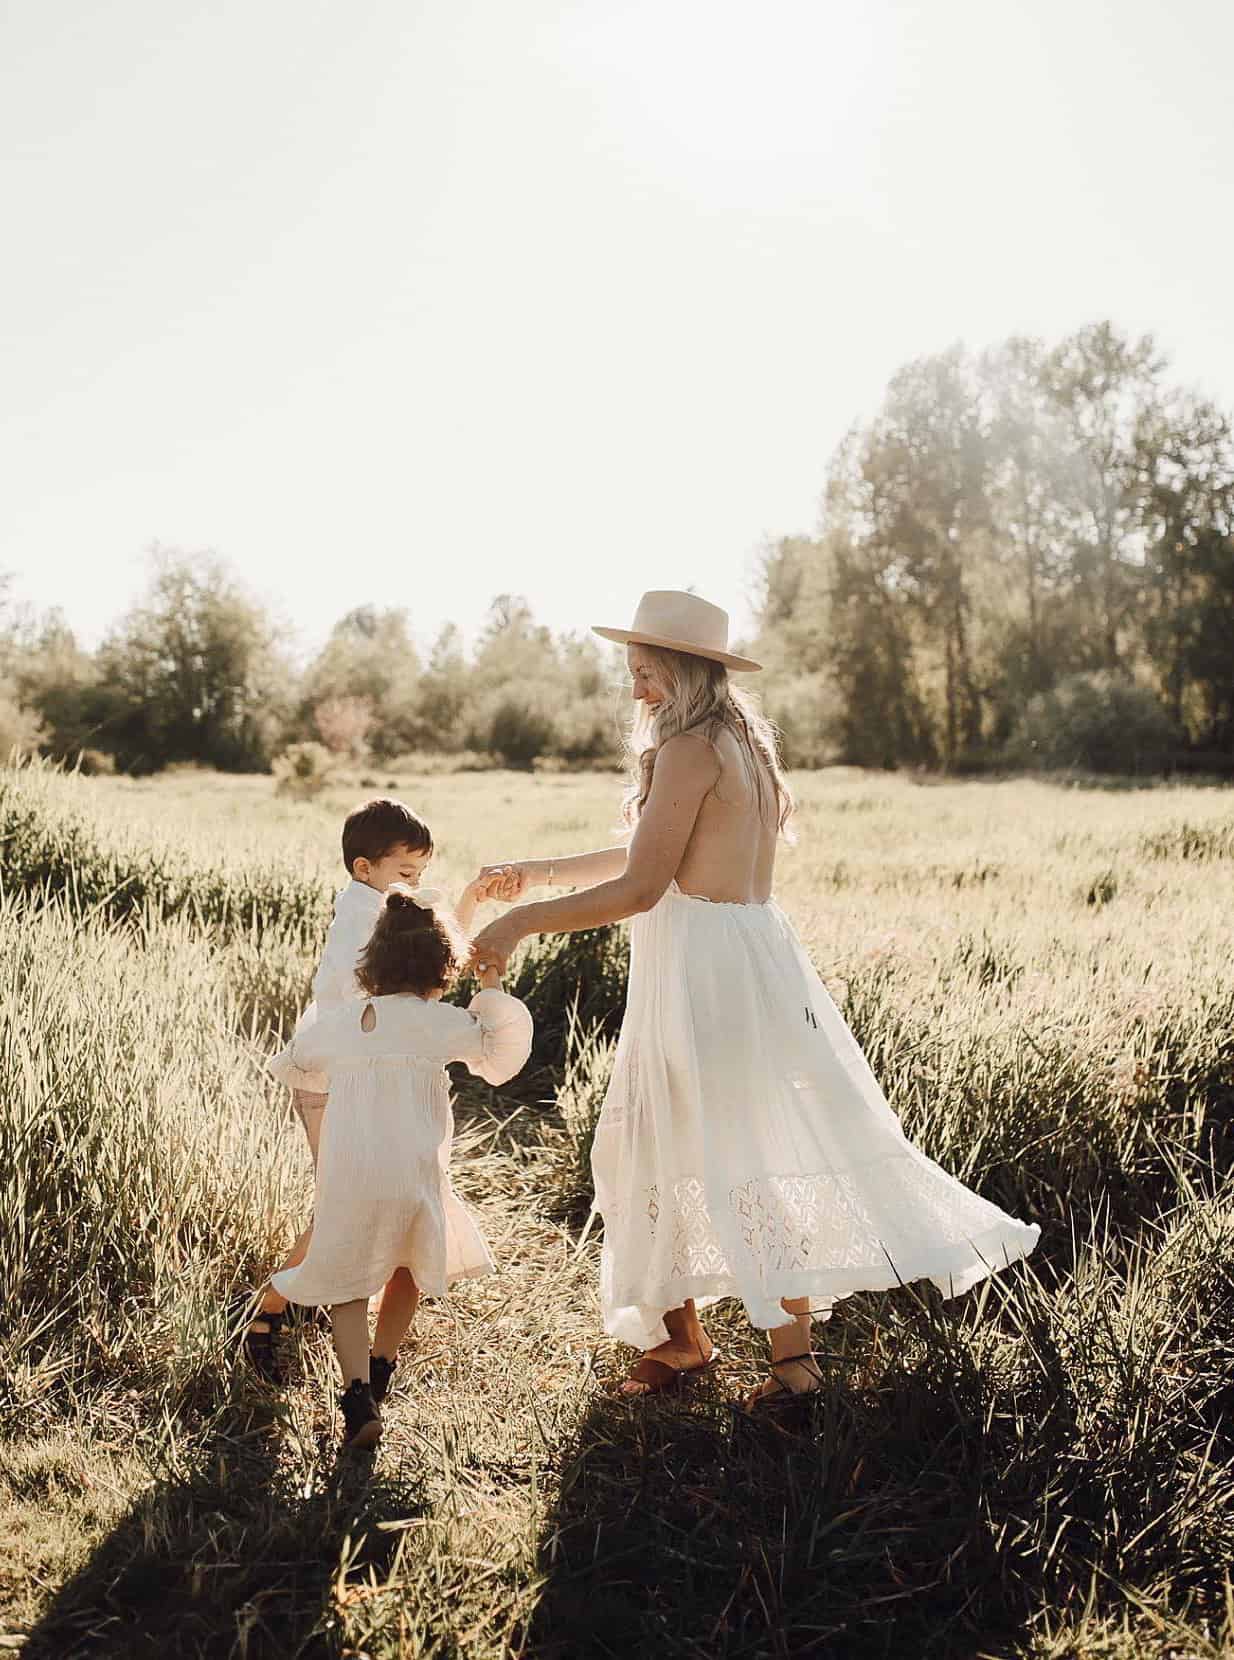 An image of a summer family portrait with A mother wearing a white summer dress and fedora dancing in a field with her children